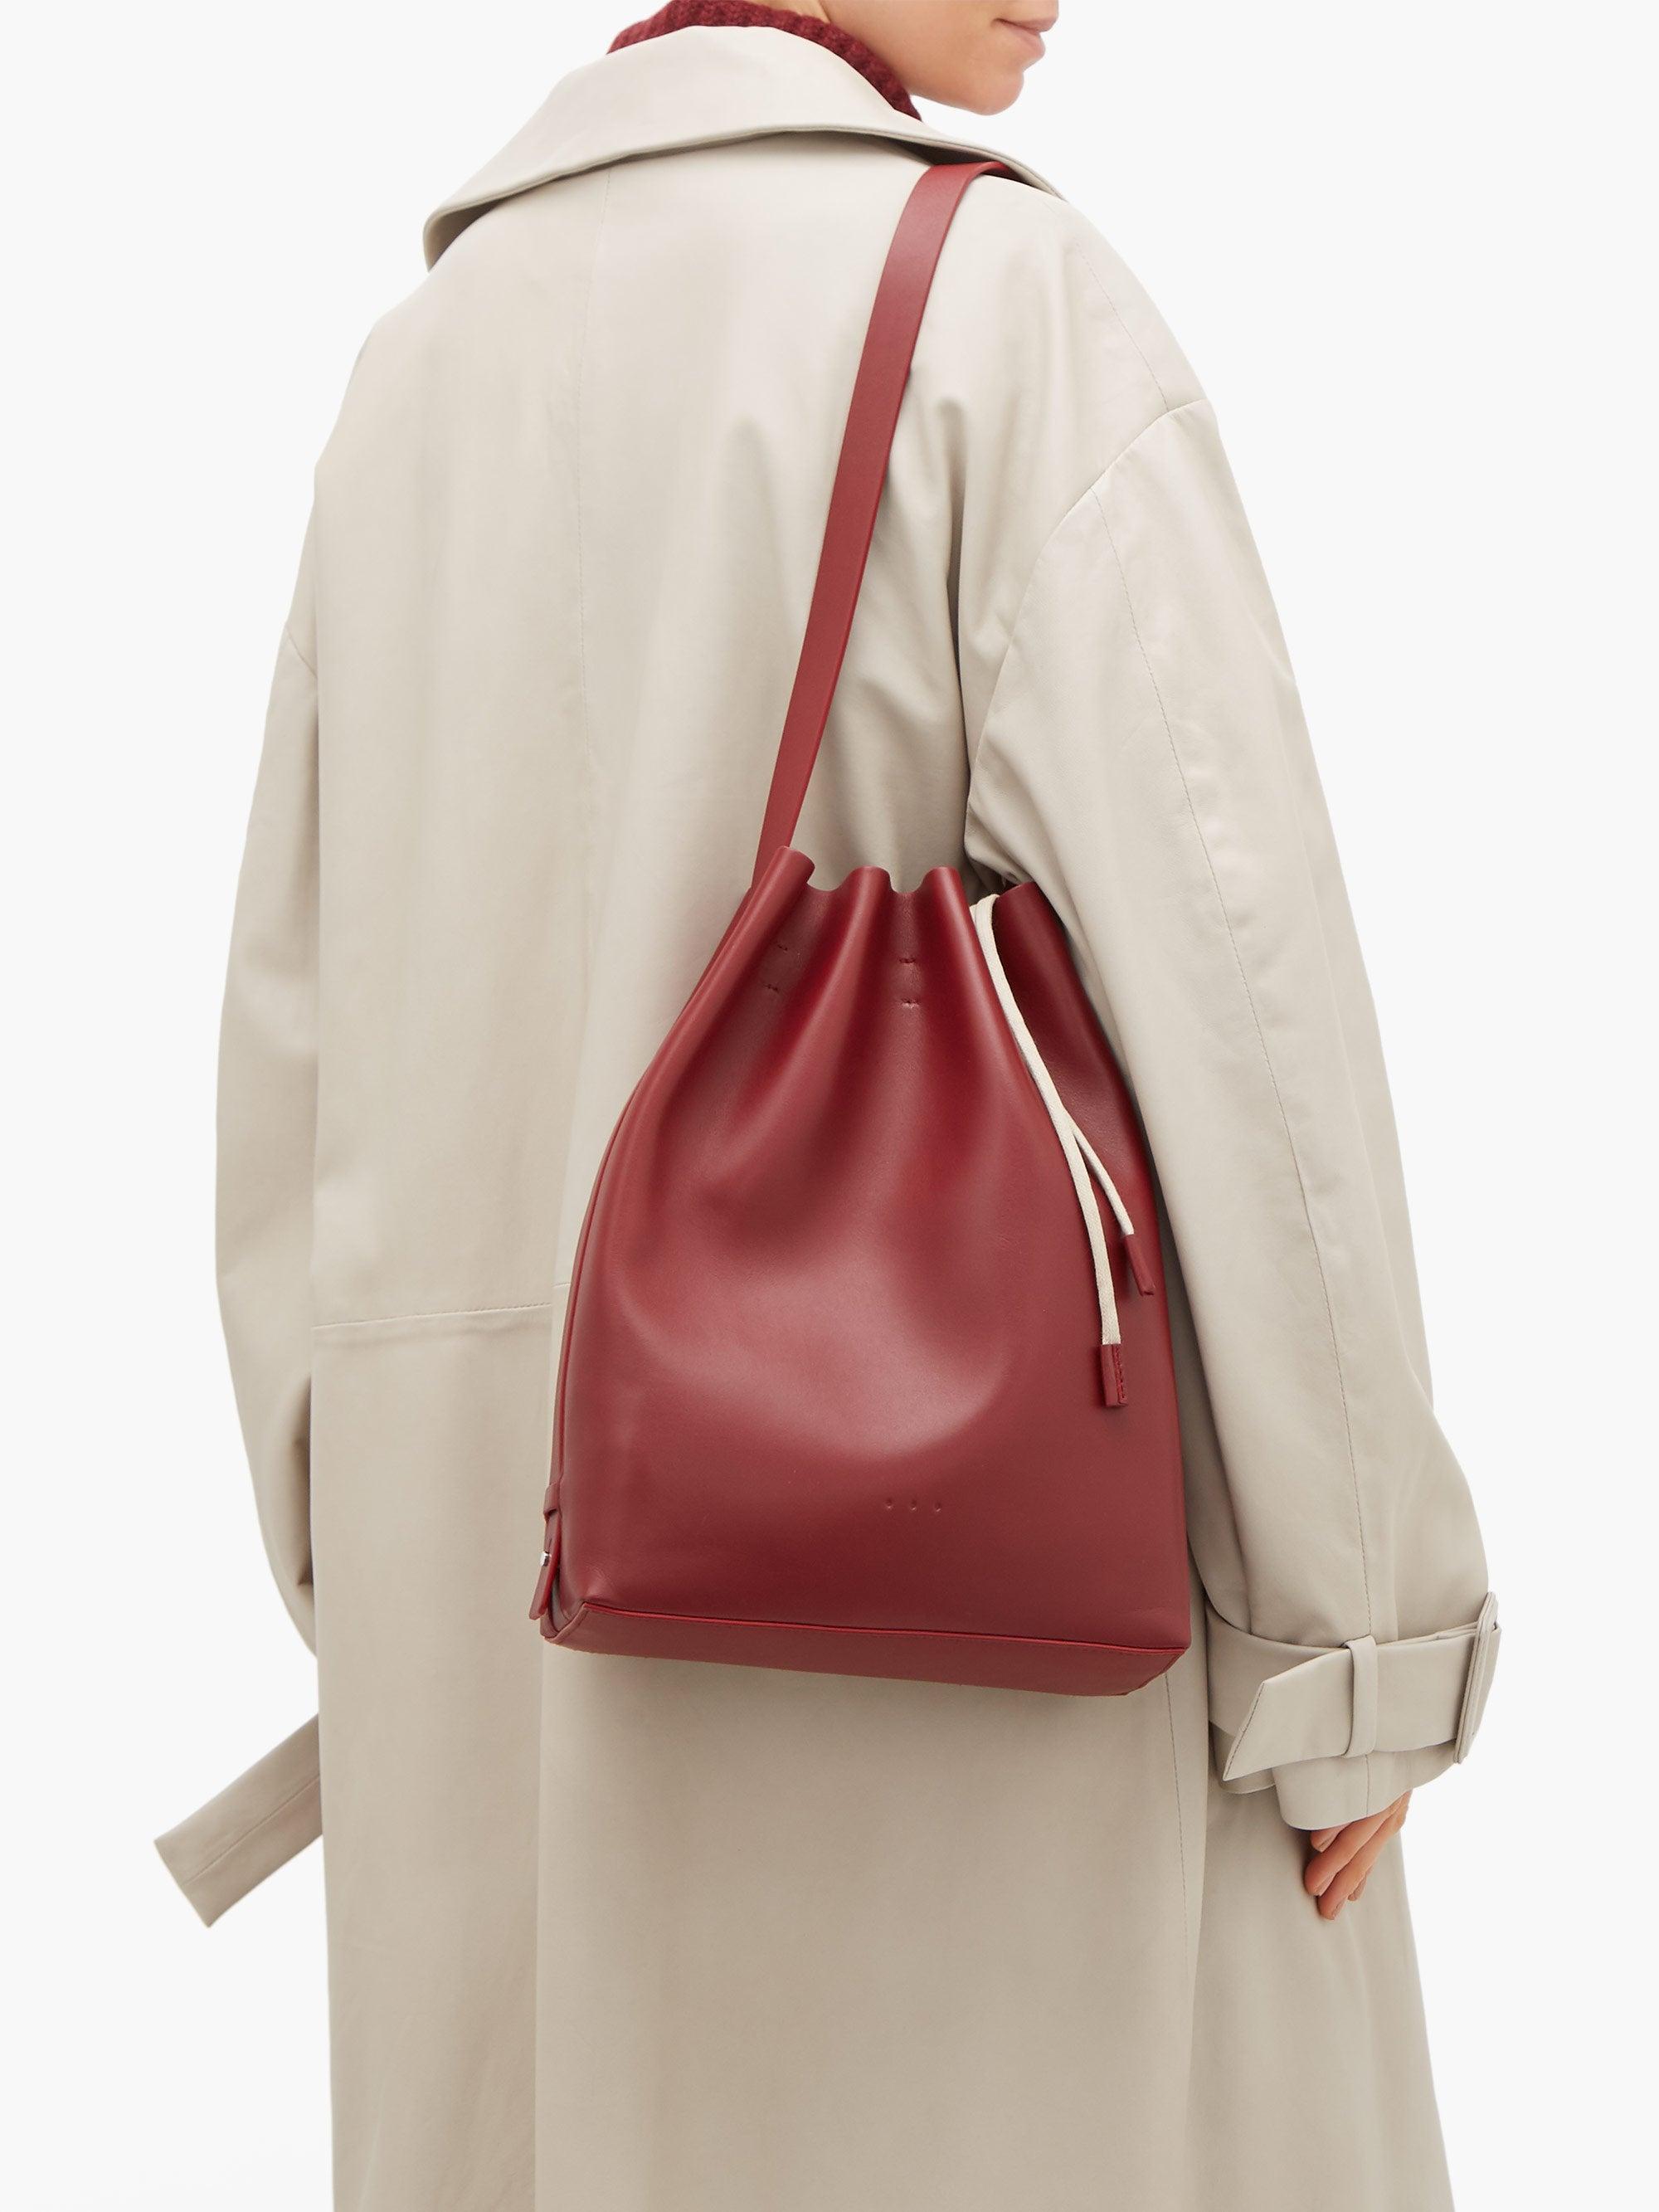 Aesther Ekme Marin Leather Bucket Bag in Burgundy (Red) | Lyst